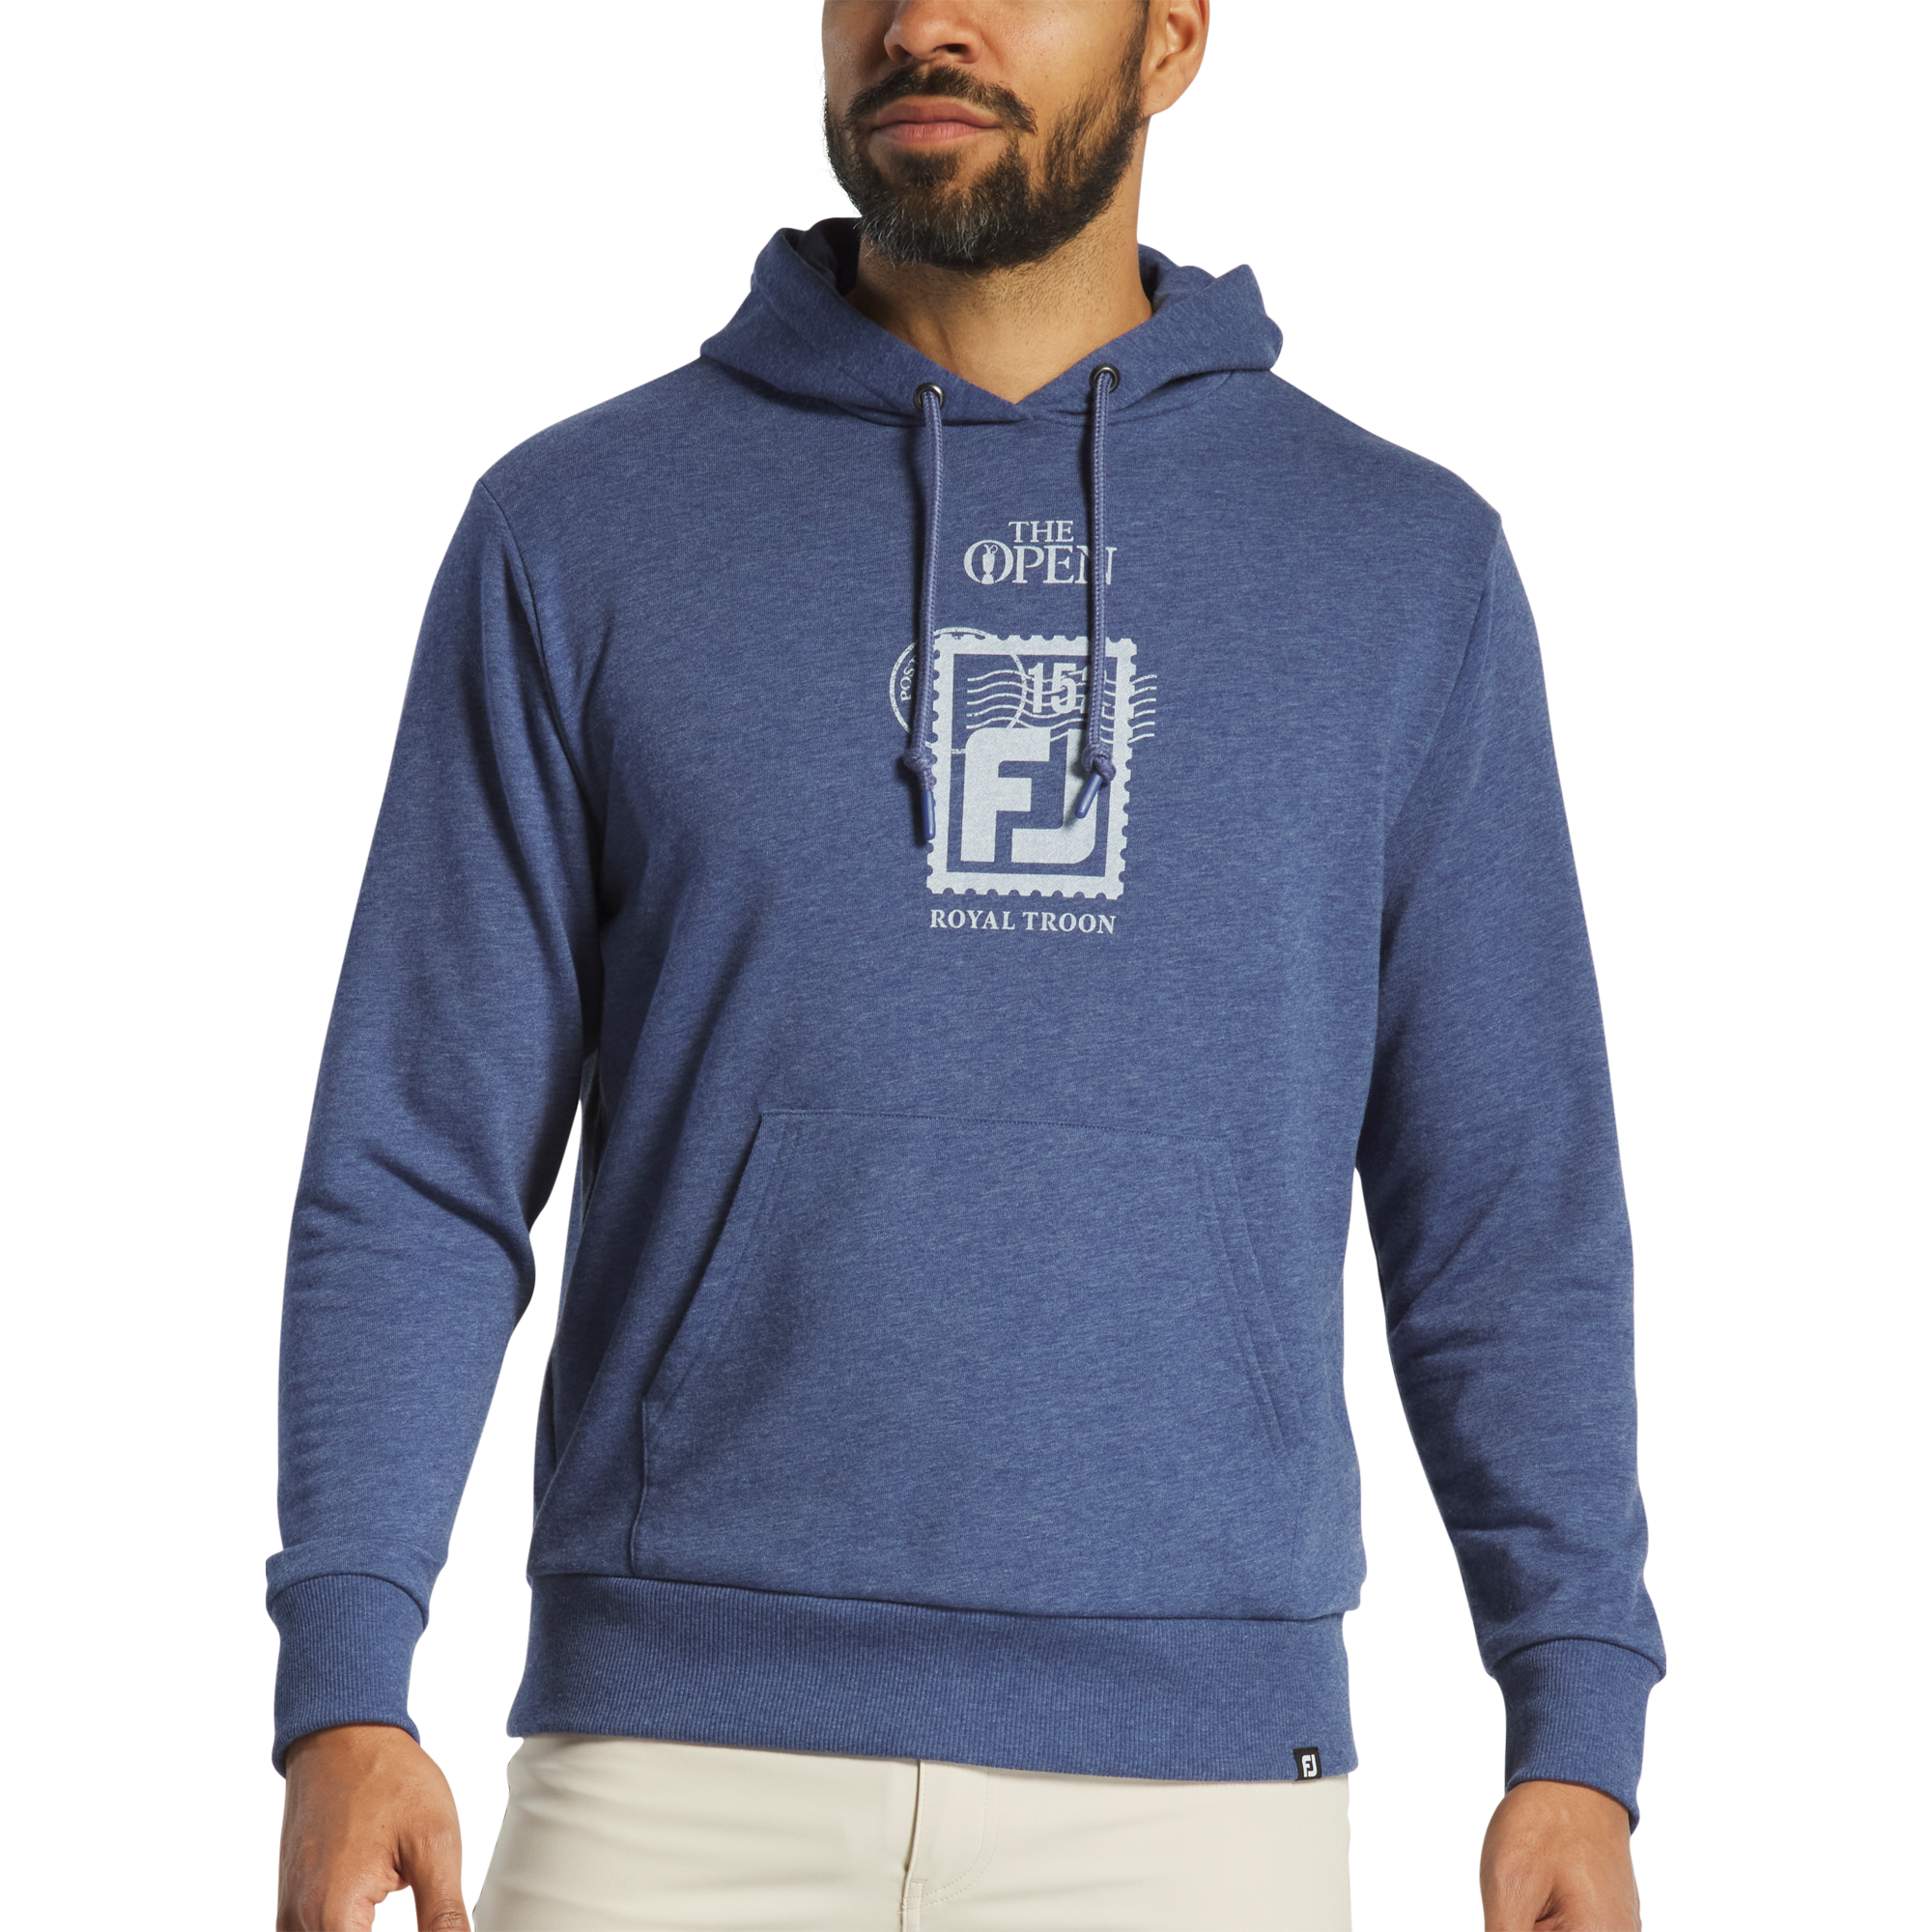 152:a Open Championship Postage Stamp Hoodie